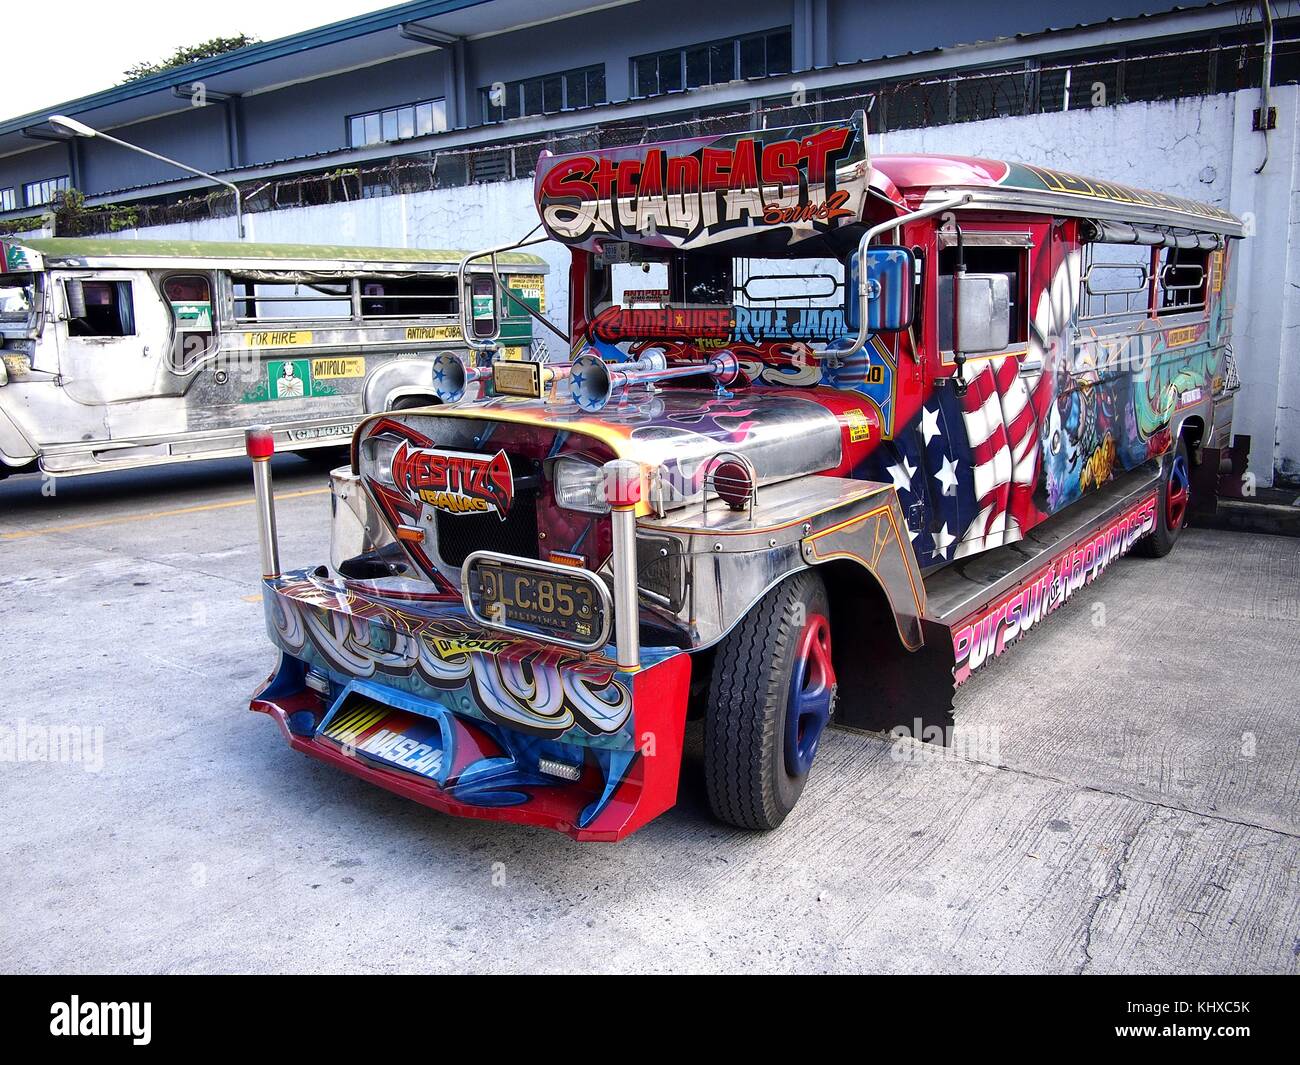 ANTIPOLO CITY, PHILIPPINES - NOVEMBER 15, 2017: Colorful passenger jeepneys with artistic designs at a jeepney parking lot. Stock Photo